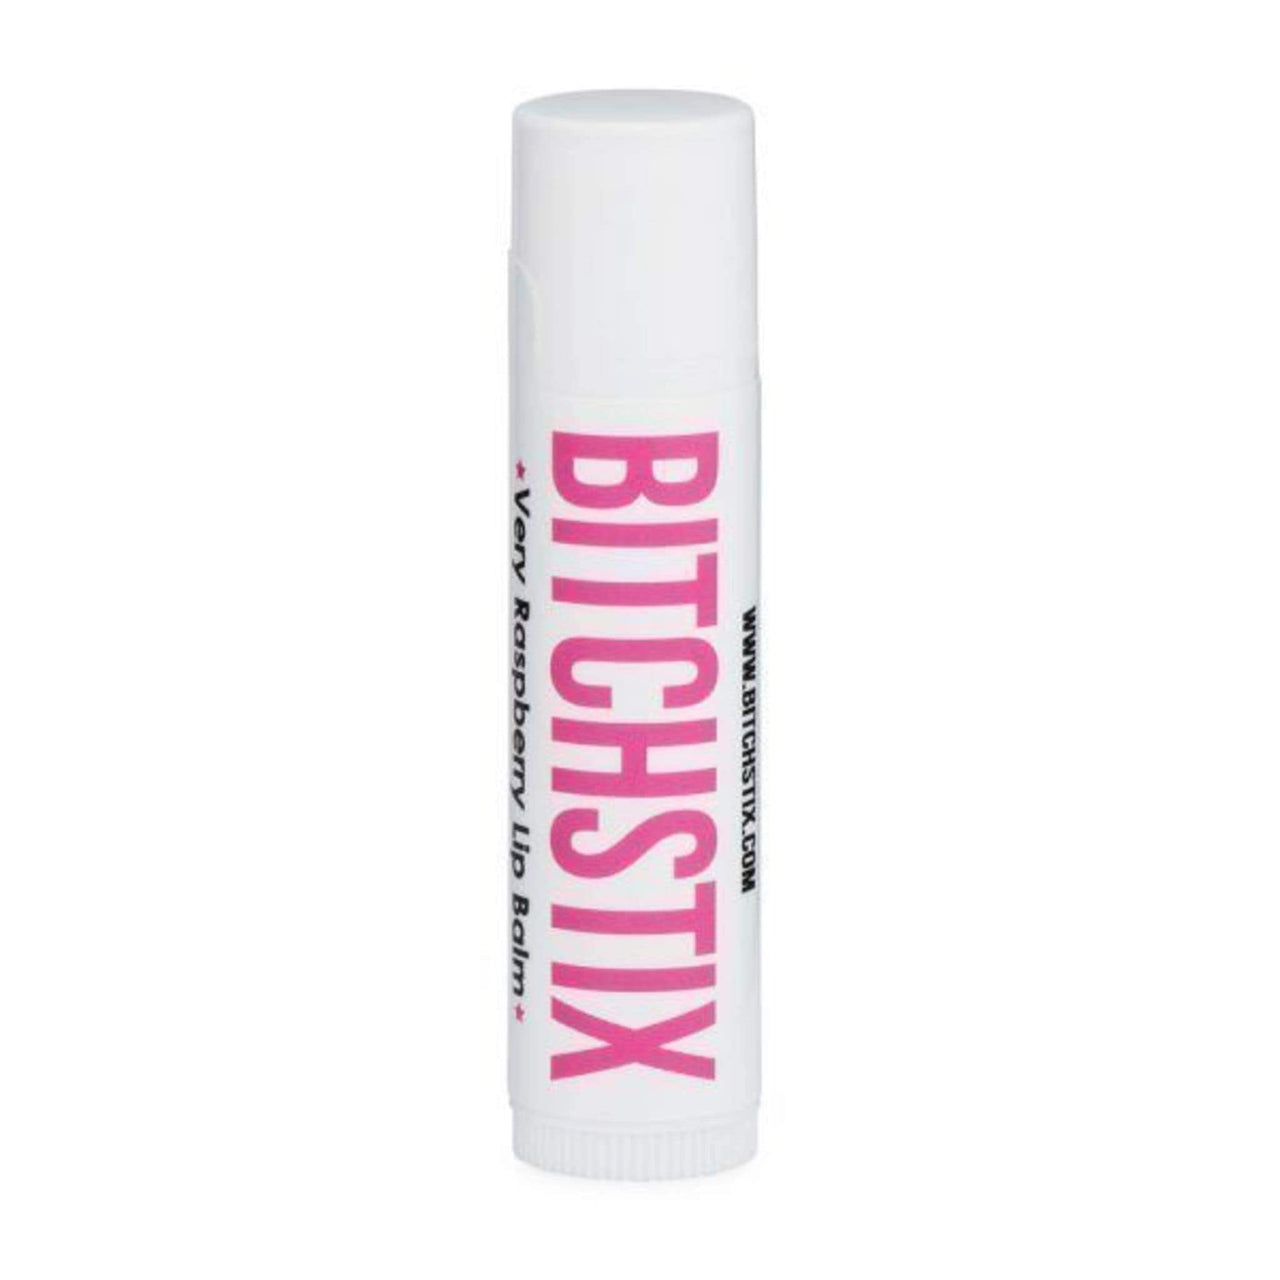 Very Raspberry SPF, Beauty Gift by BitchStix | LIT Boutique